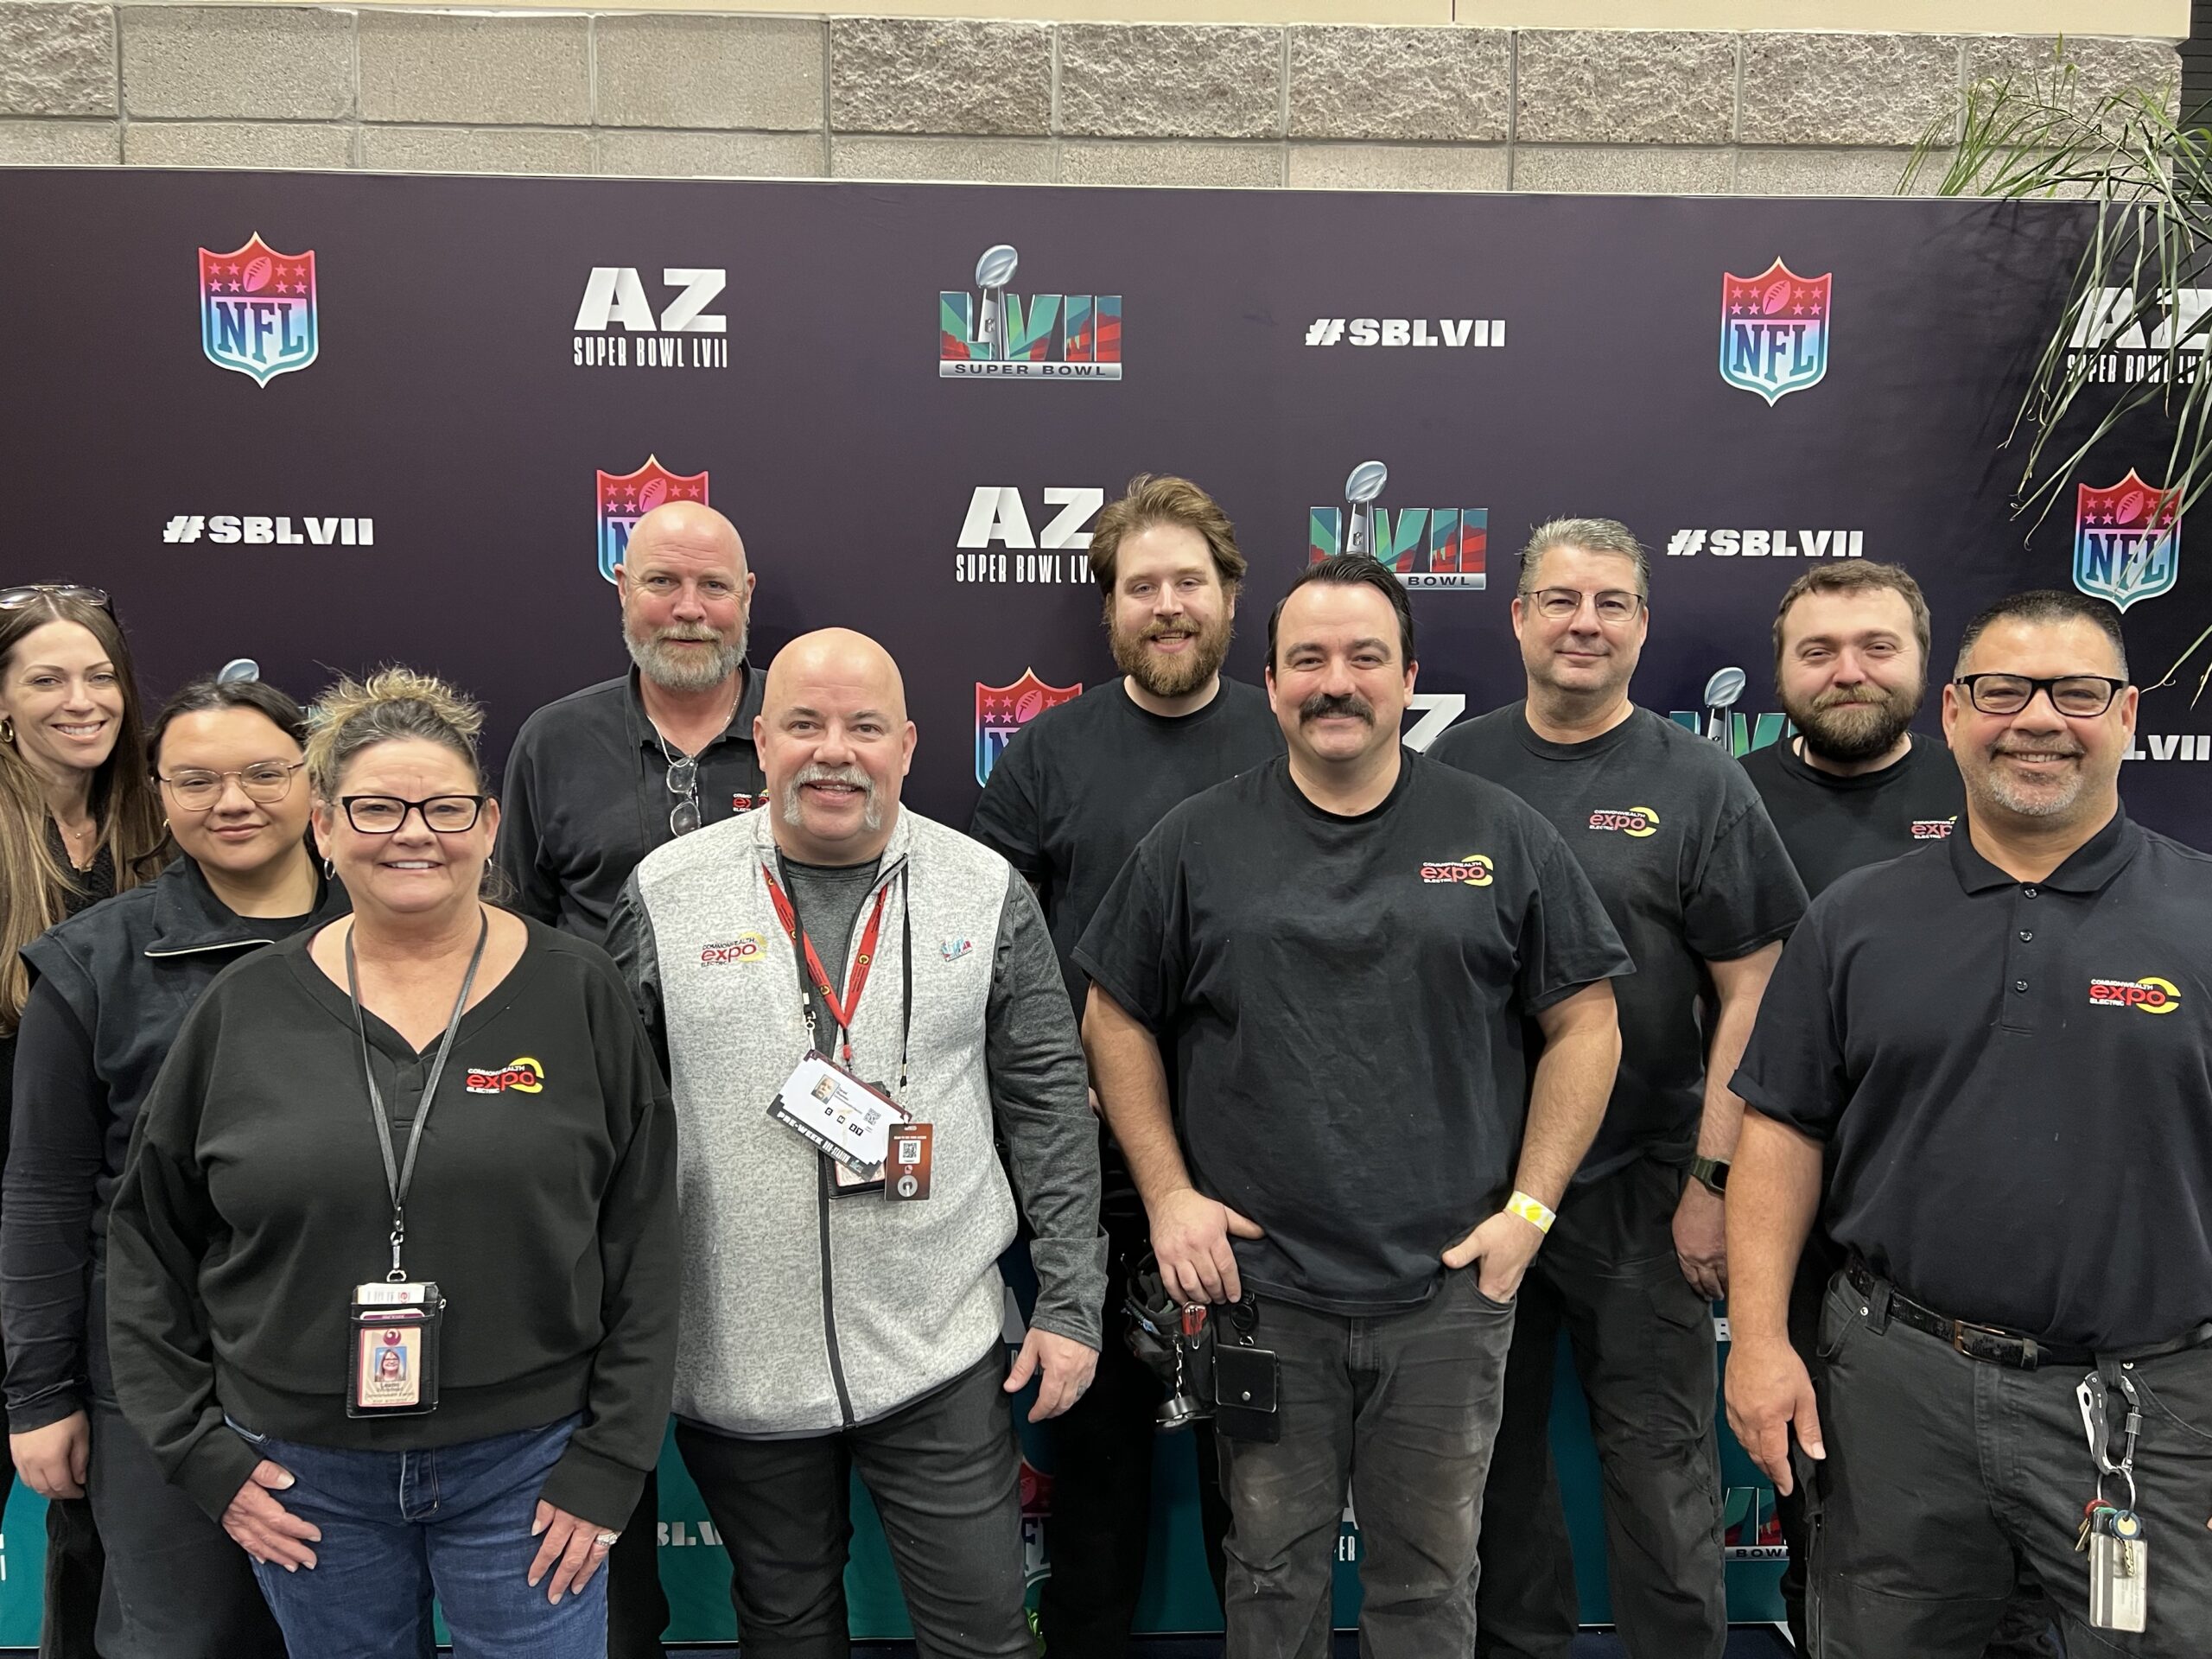 Our Expo team gathers for a picture at Super Bowl LVII